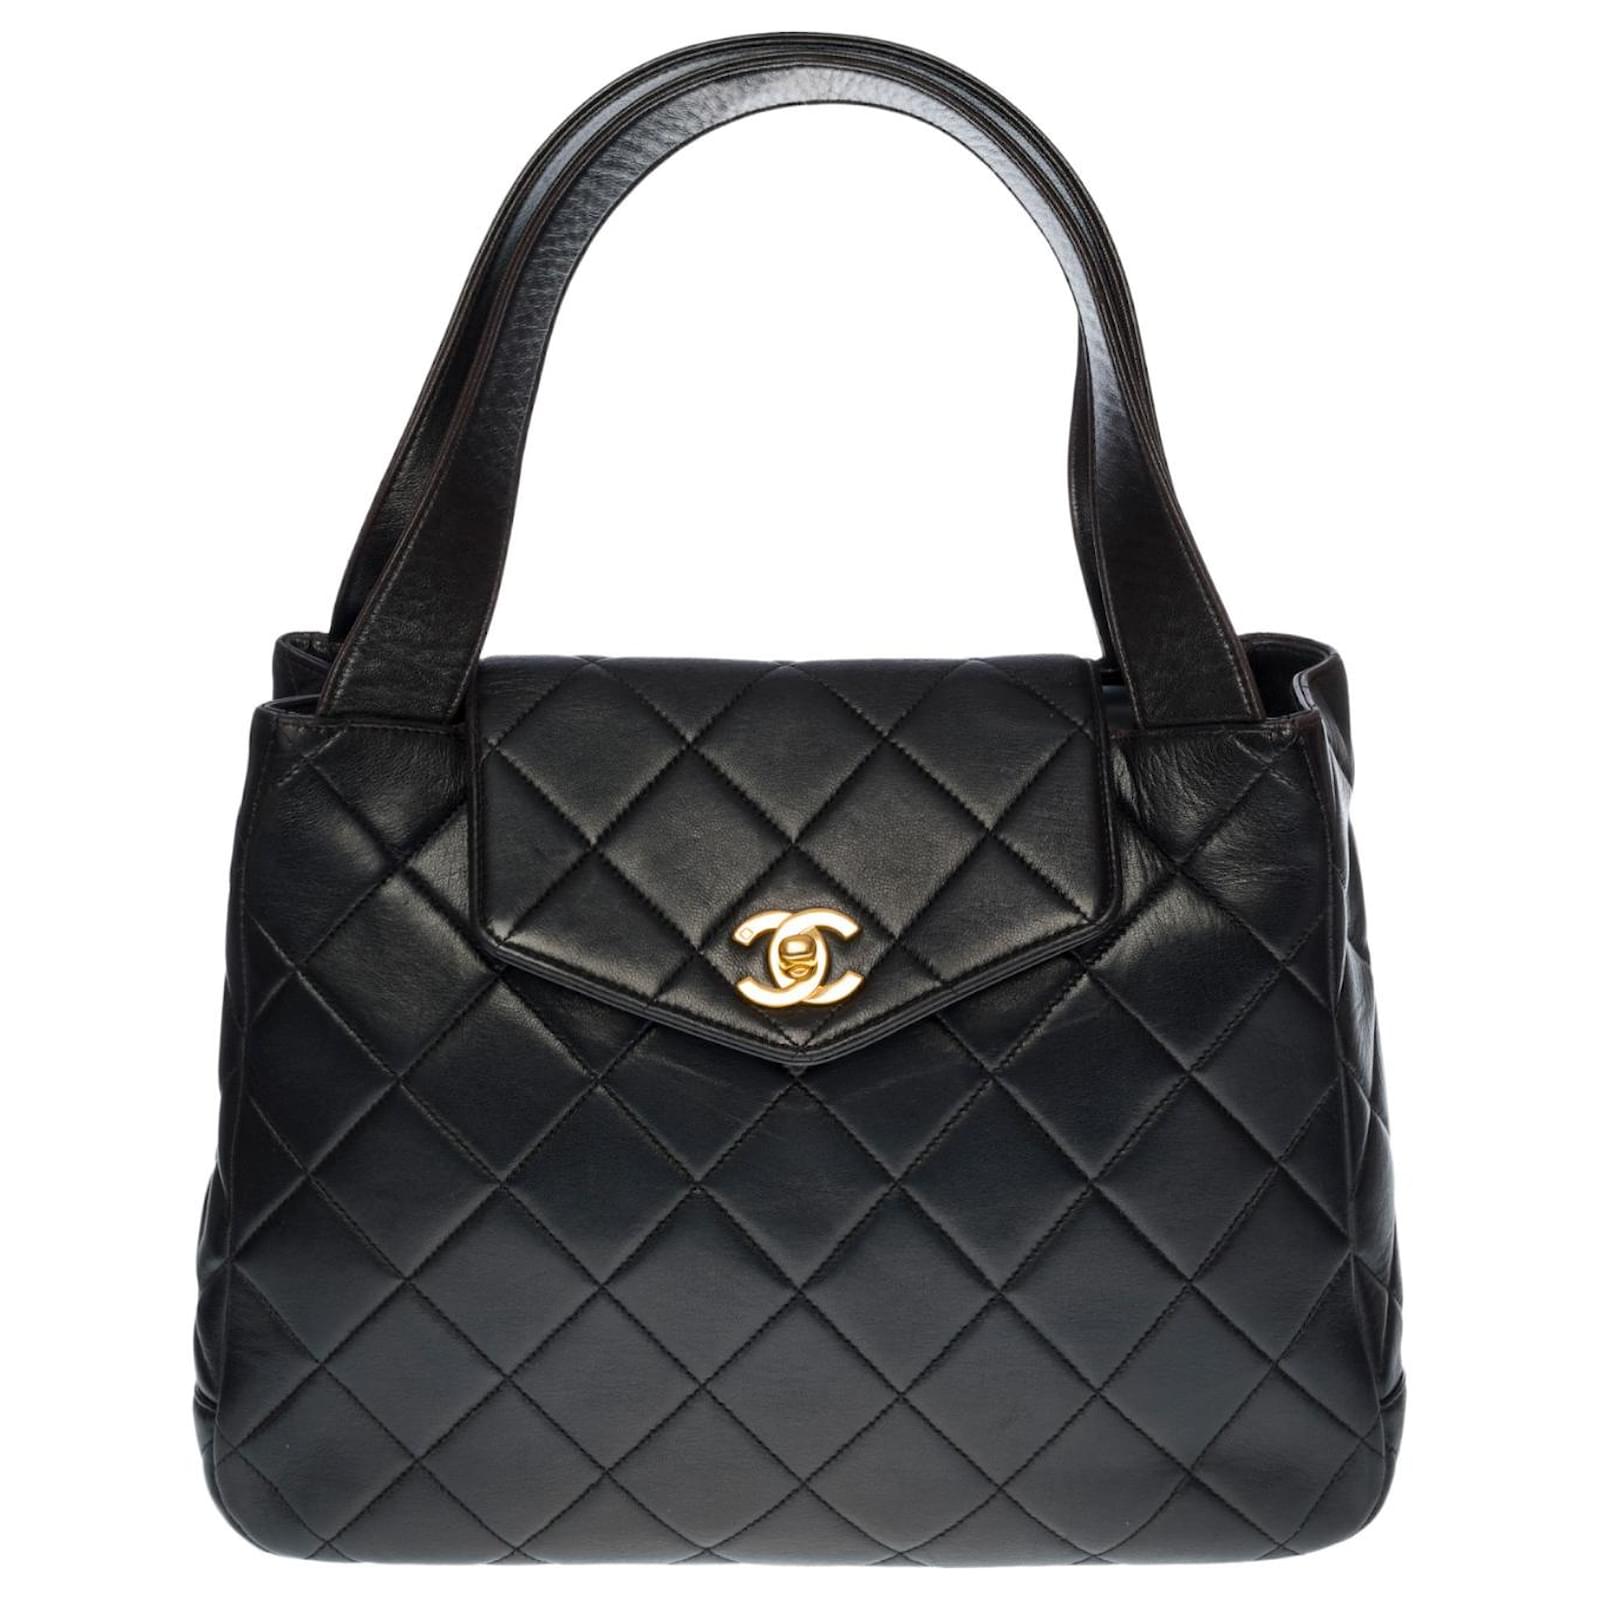 Lovely vintage Chanel shopping bag in black quilted leather